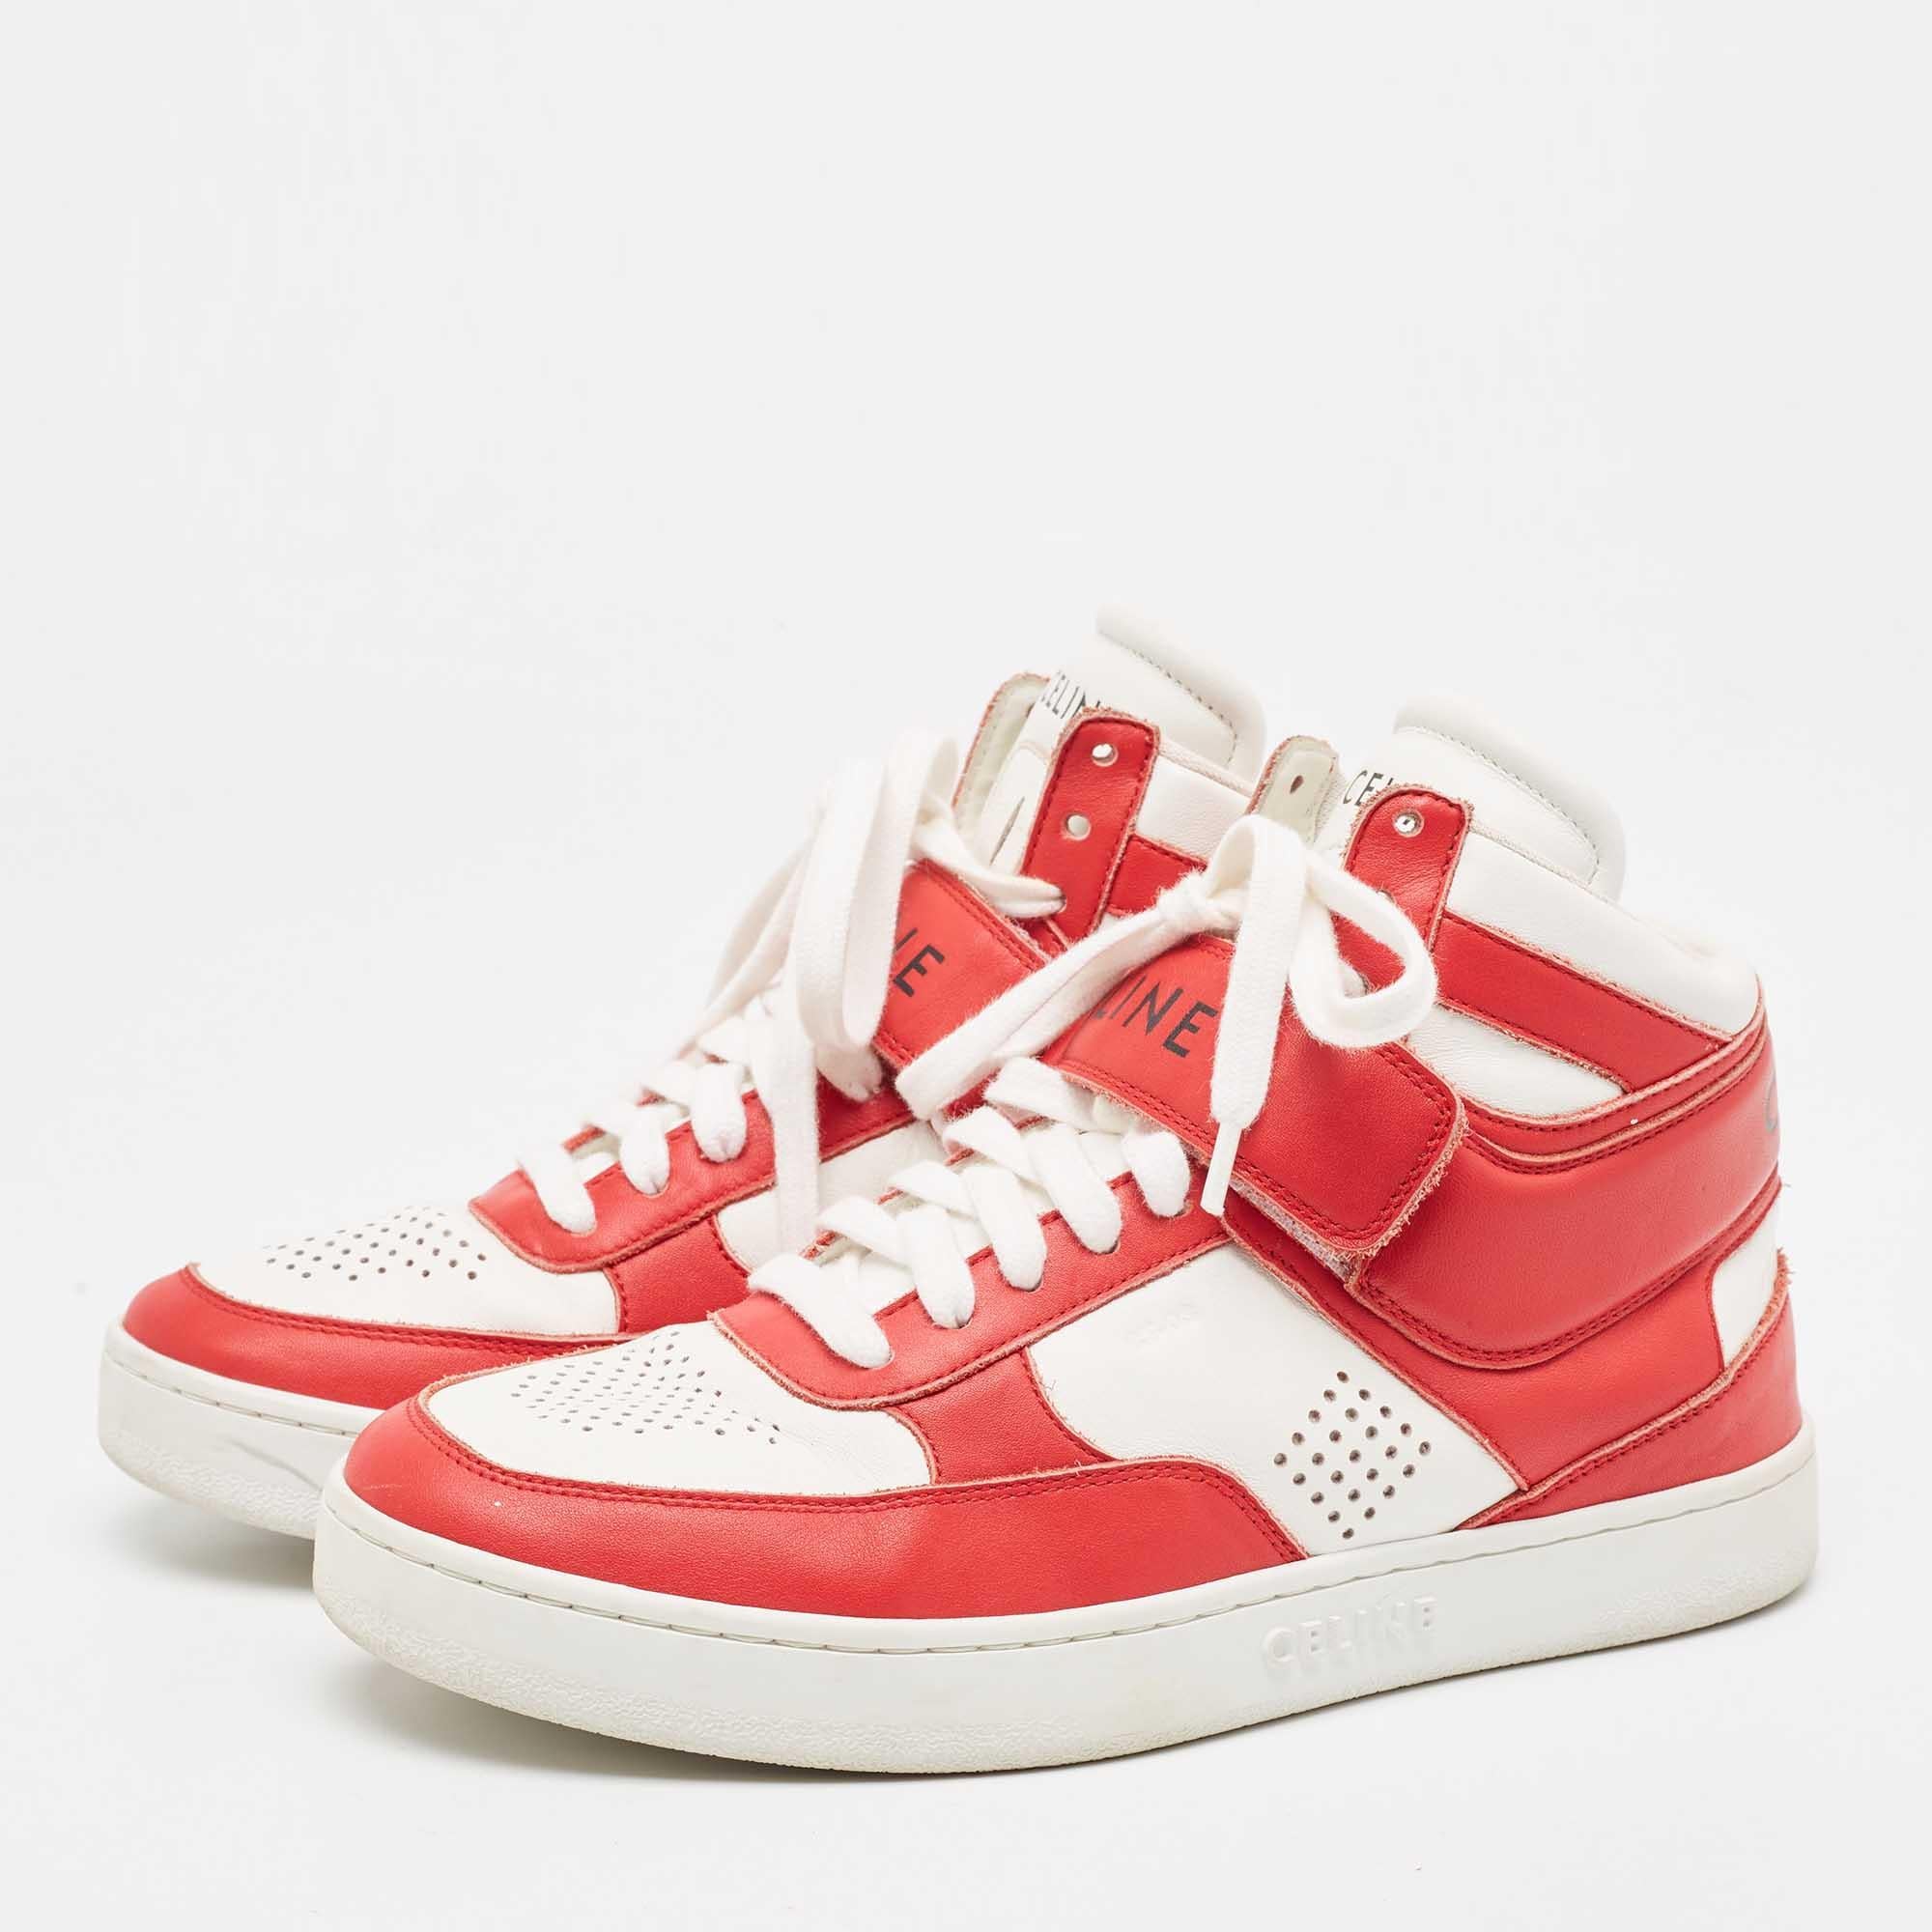 Celine Red/White Leather High Top Sneakers Size 38 In Good Condition For Sale In Dubai, Al Qouz 2